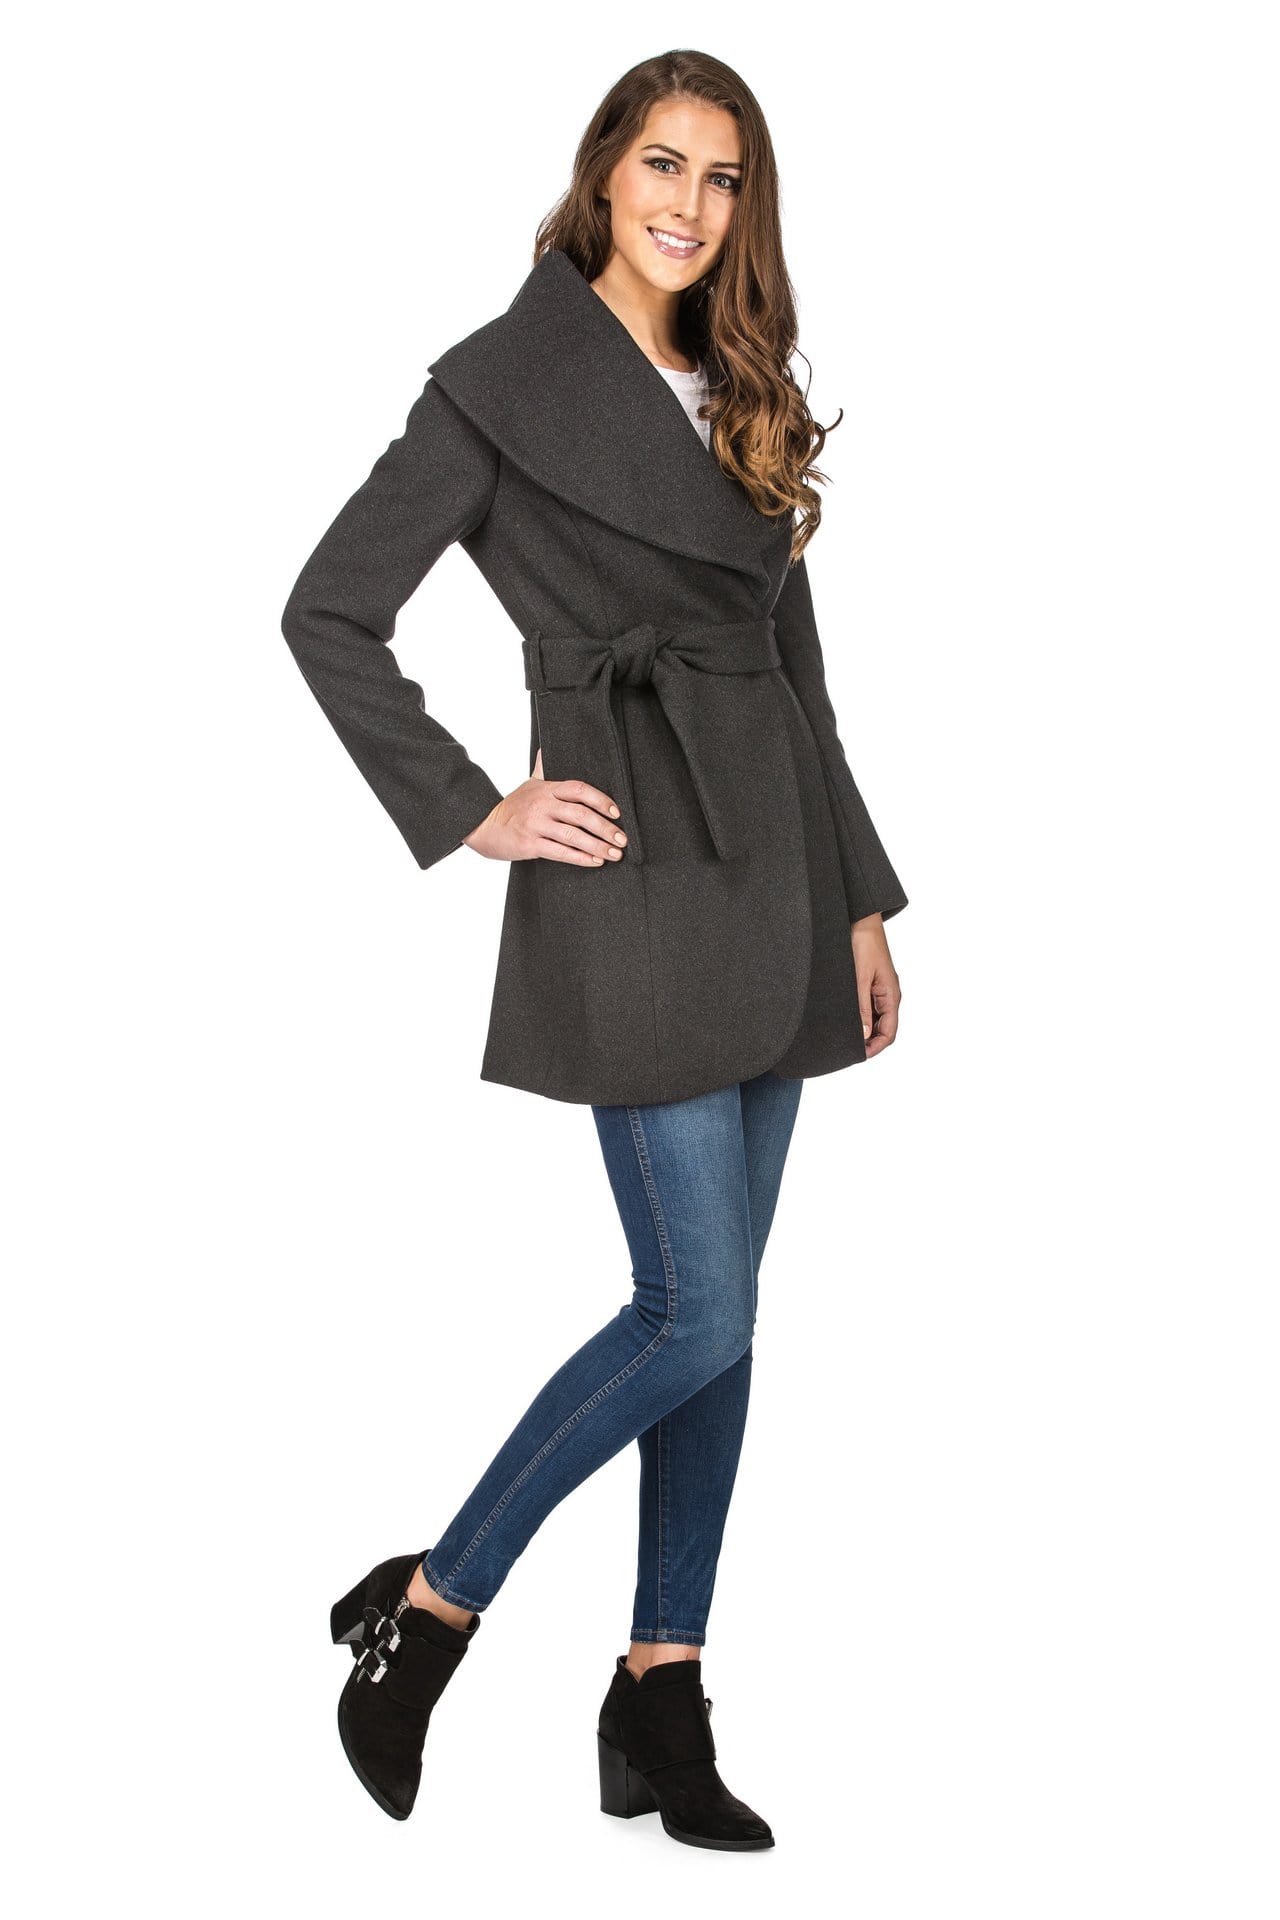 32-5 Wrap jacket with shawl collar made of boiled merino wool